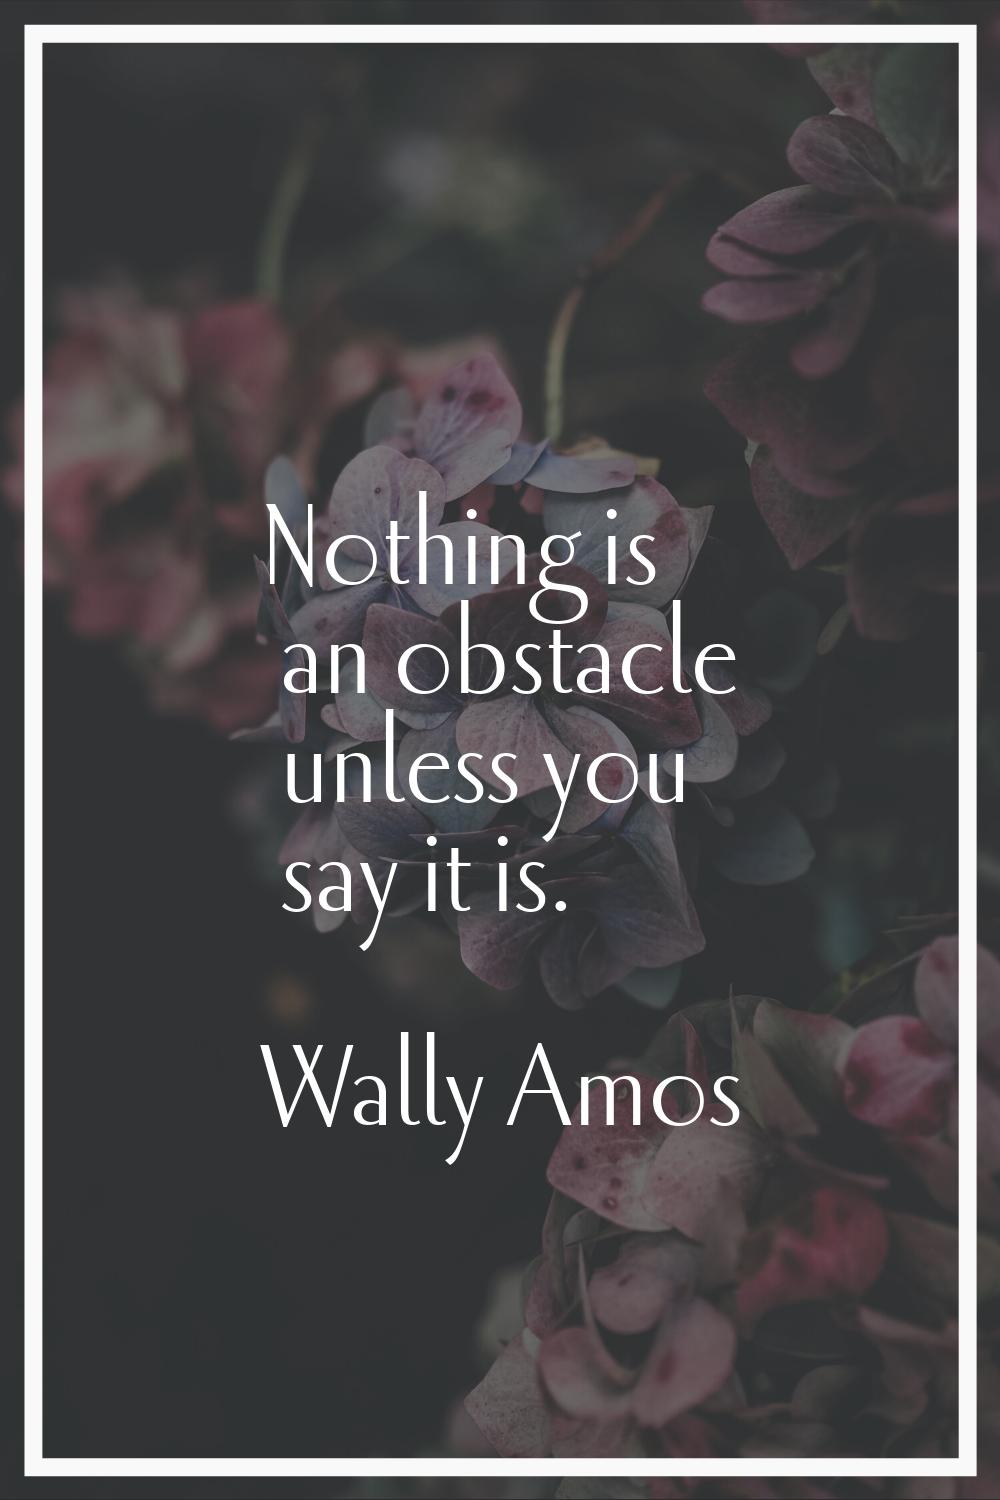 Nothing is an obstacle unless you say it is.